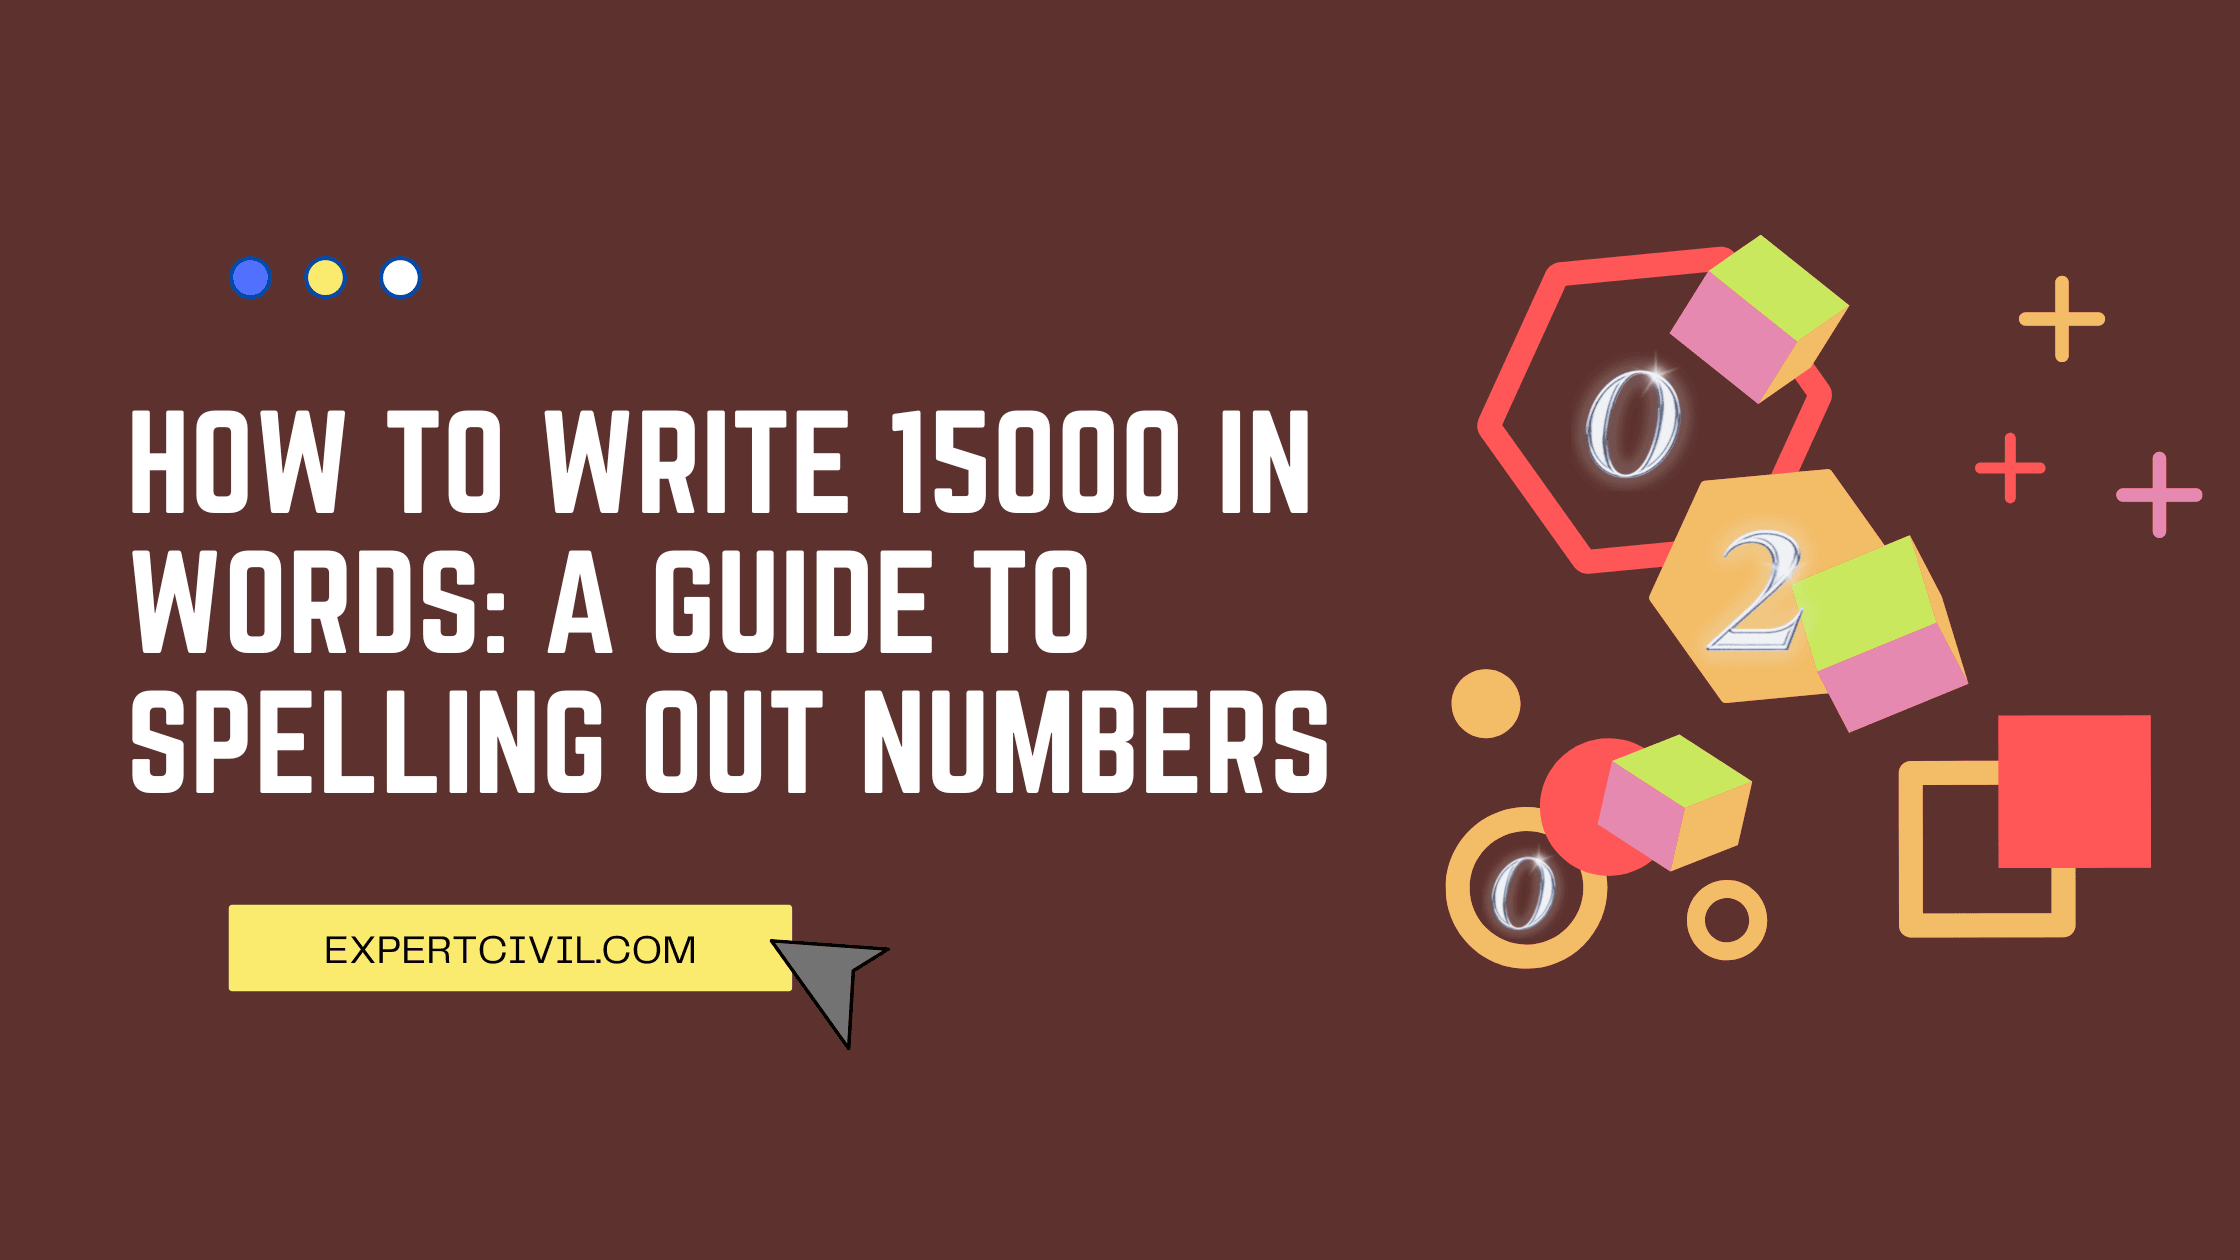 How to Write 15000 in Words?